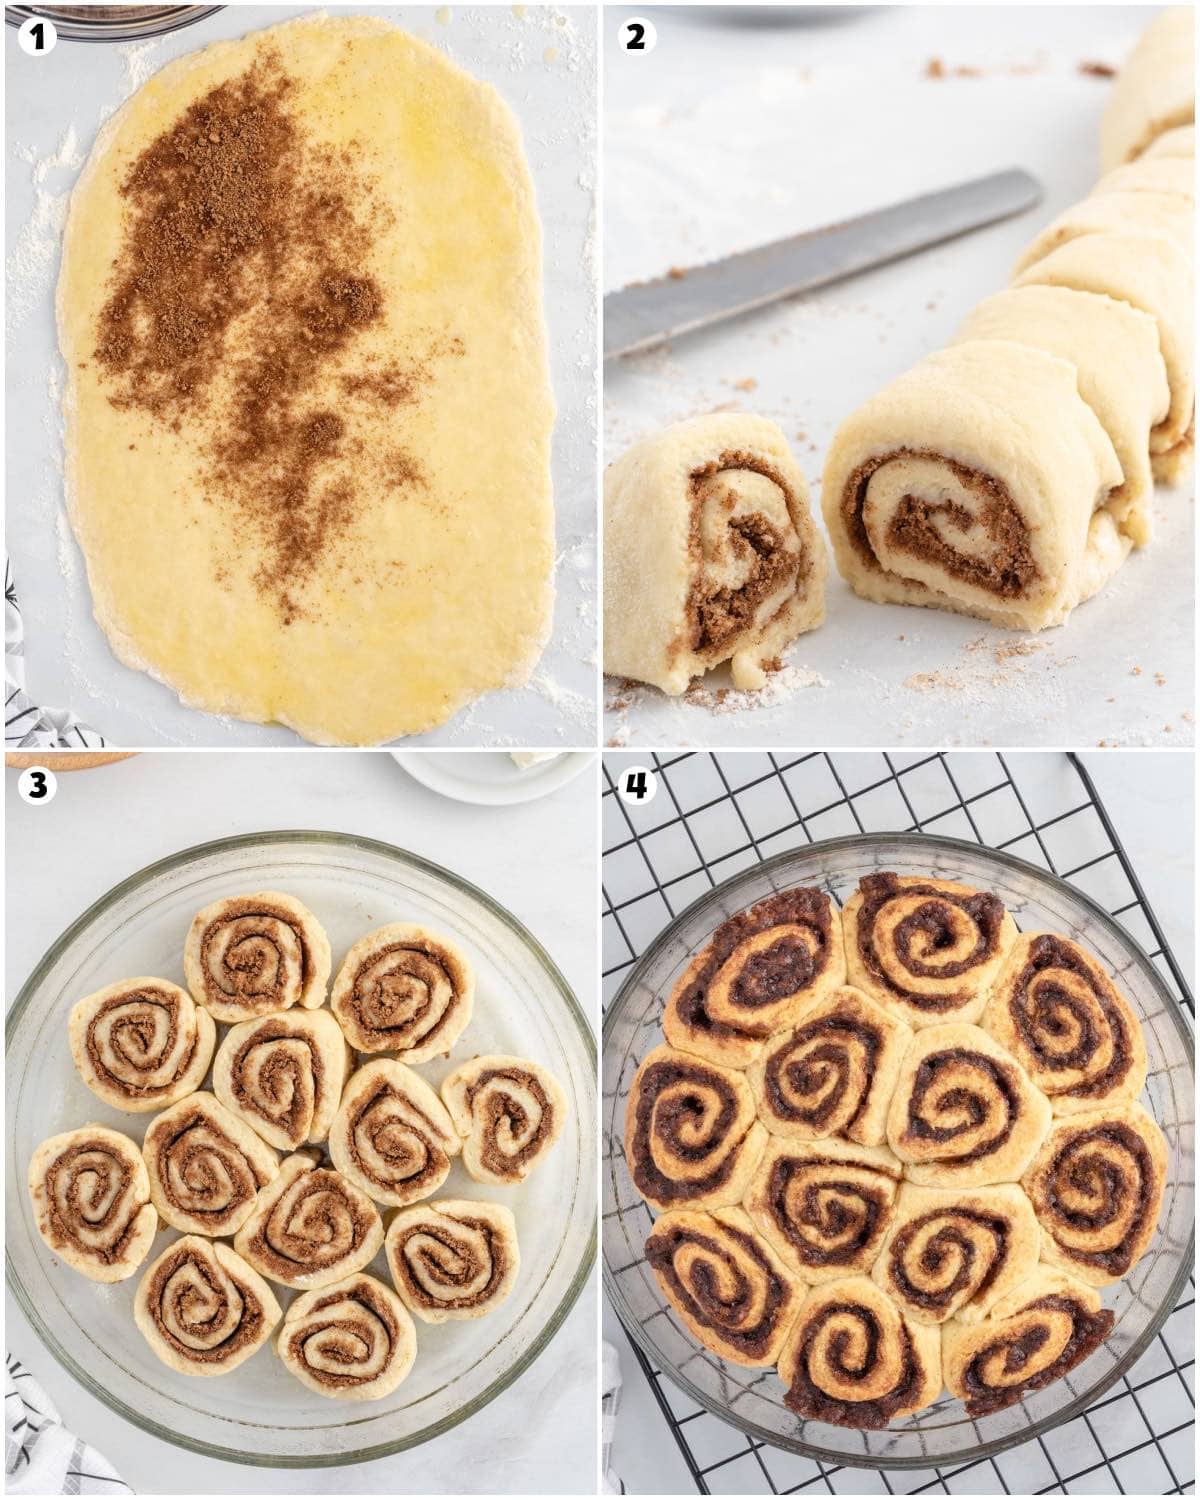 spread the brown sugar and cinnamon mixture on top of the dough. roll up the dough and cut. place each rolls in a round pan. baked cinnamon rolls in a pan.